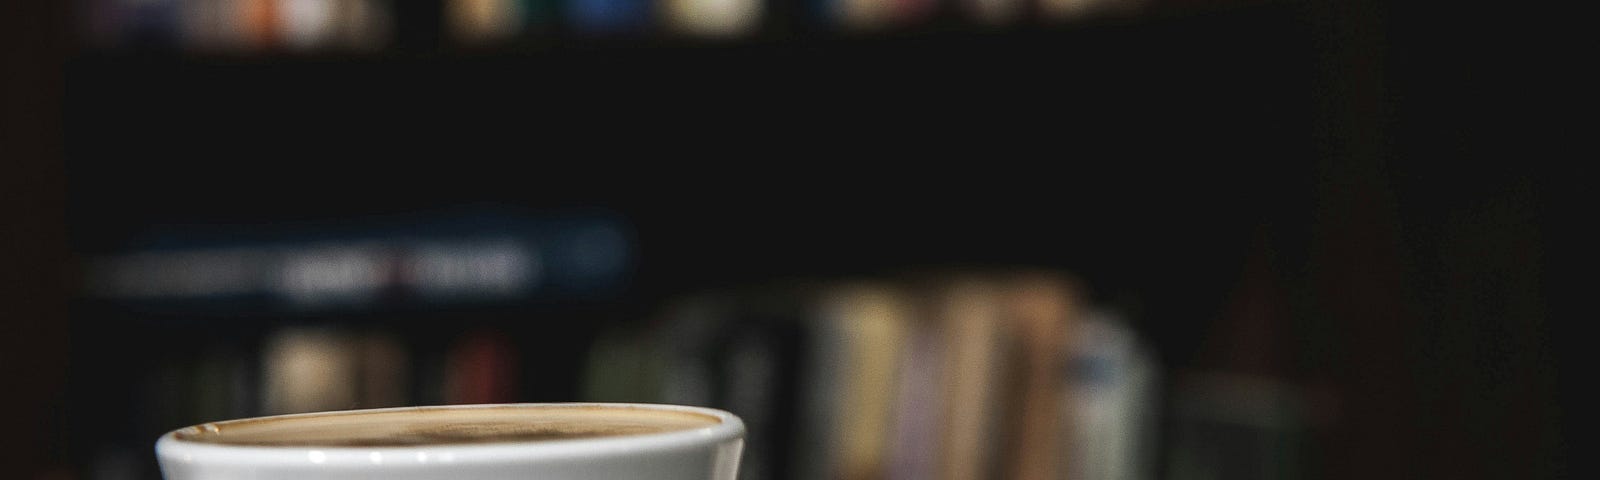 Coffee cup sitting next to an open book on a table